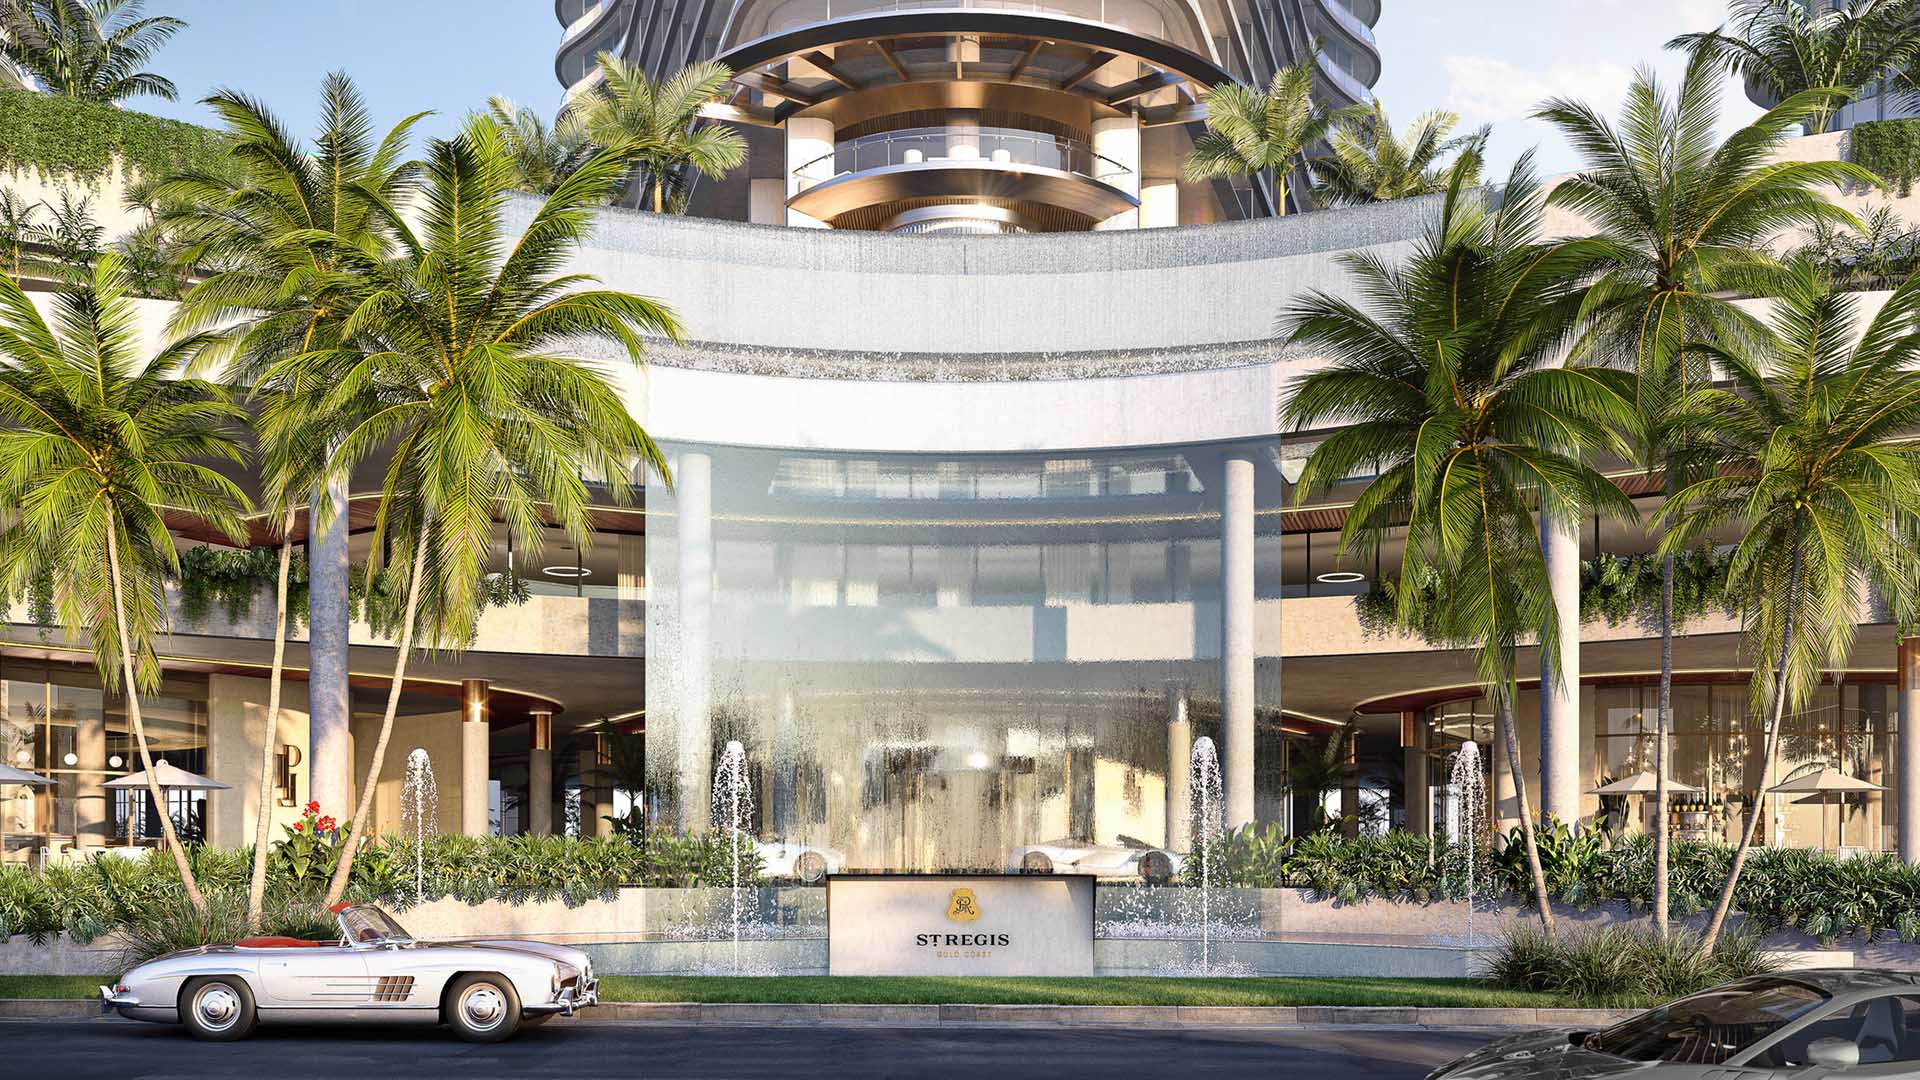 Luxury Hotel Brand St Regis Is Opening Its First Australian Outpost on the Gold Coast in 2027